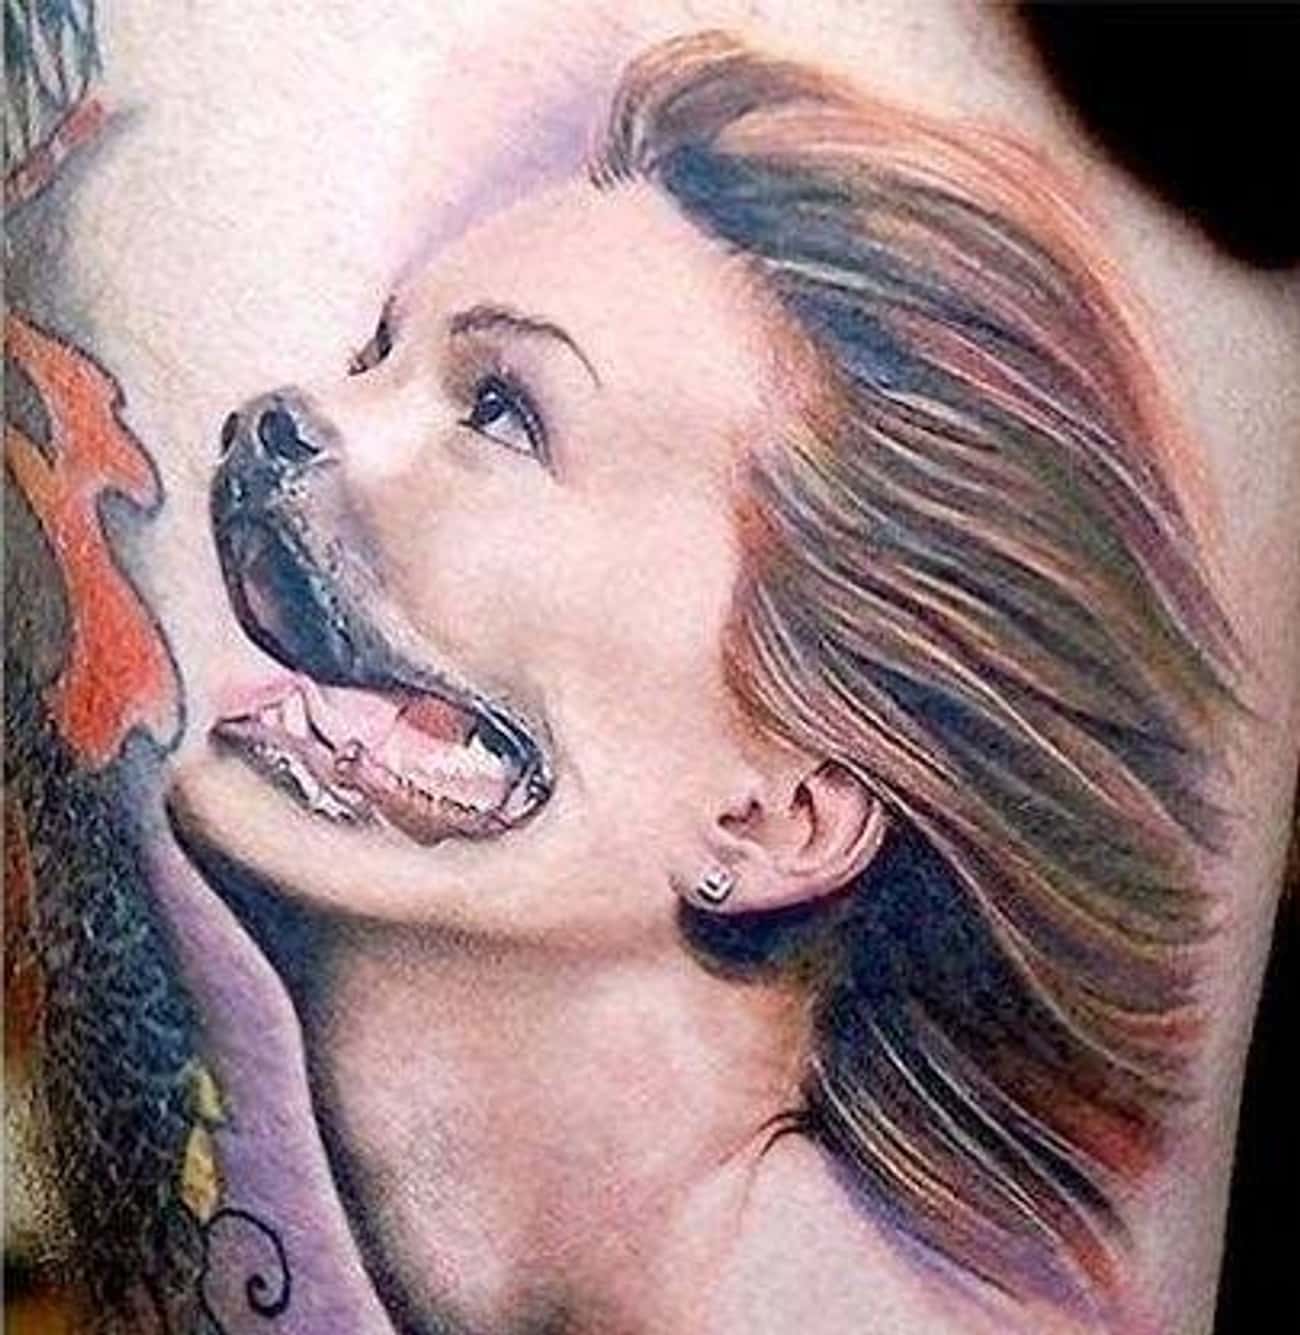 You Had To Have Known A Woman With A Dog&#39;s Mouth Would Be An Abomination